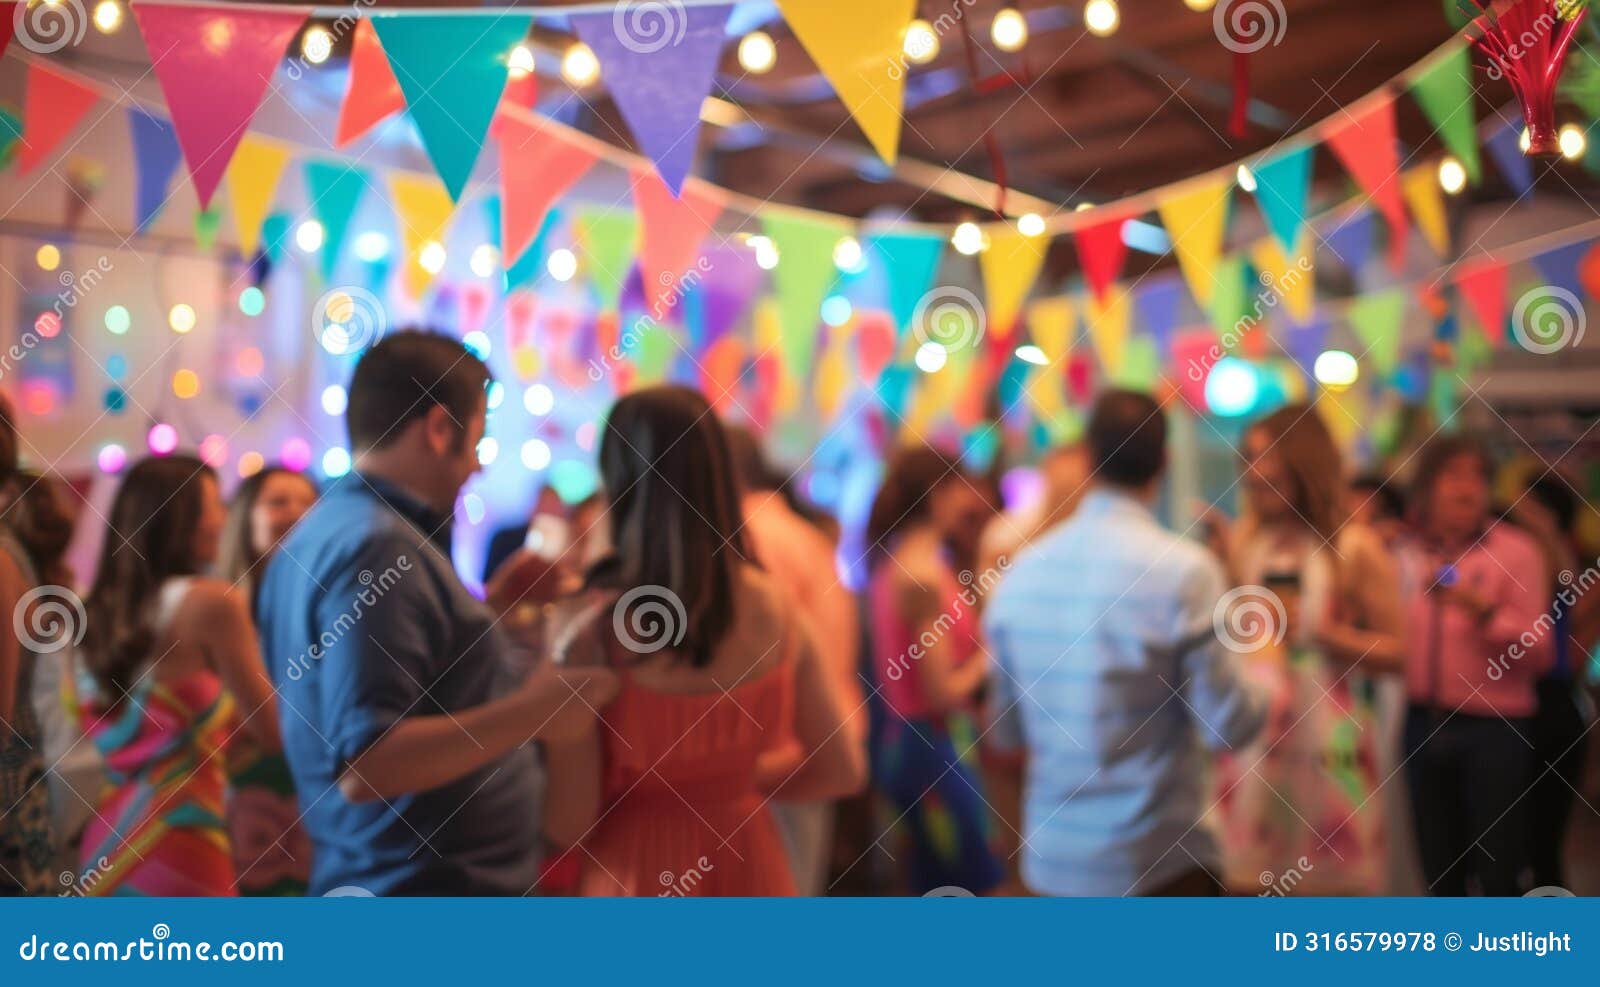 a colorful banner with the words sober celebrating hangs in the background as guests dance and mingle at the alcoholfree